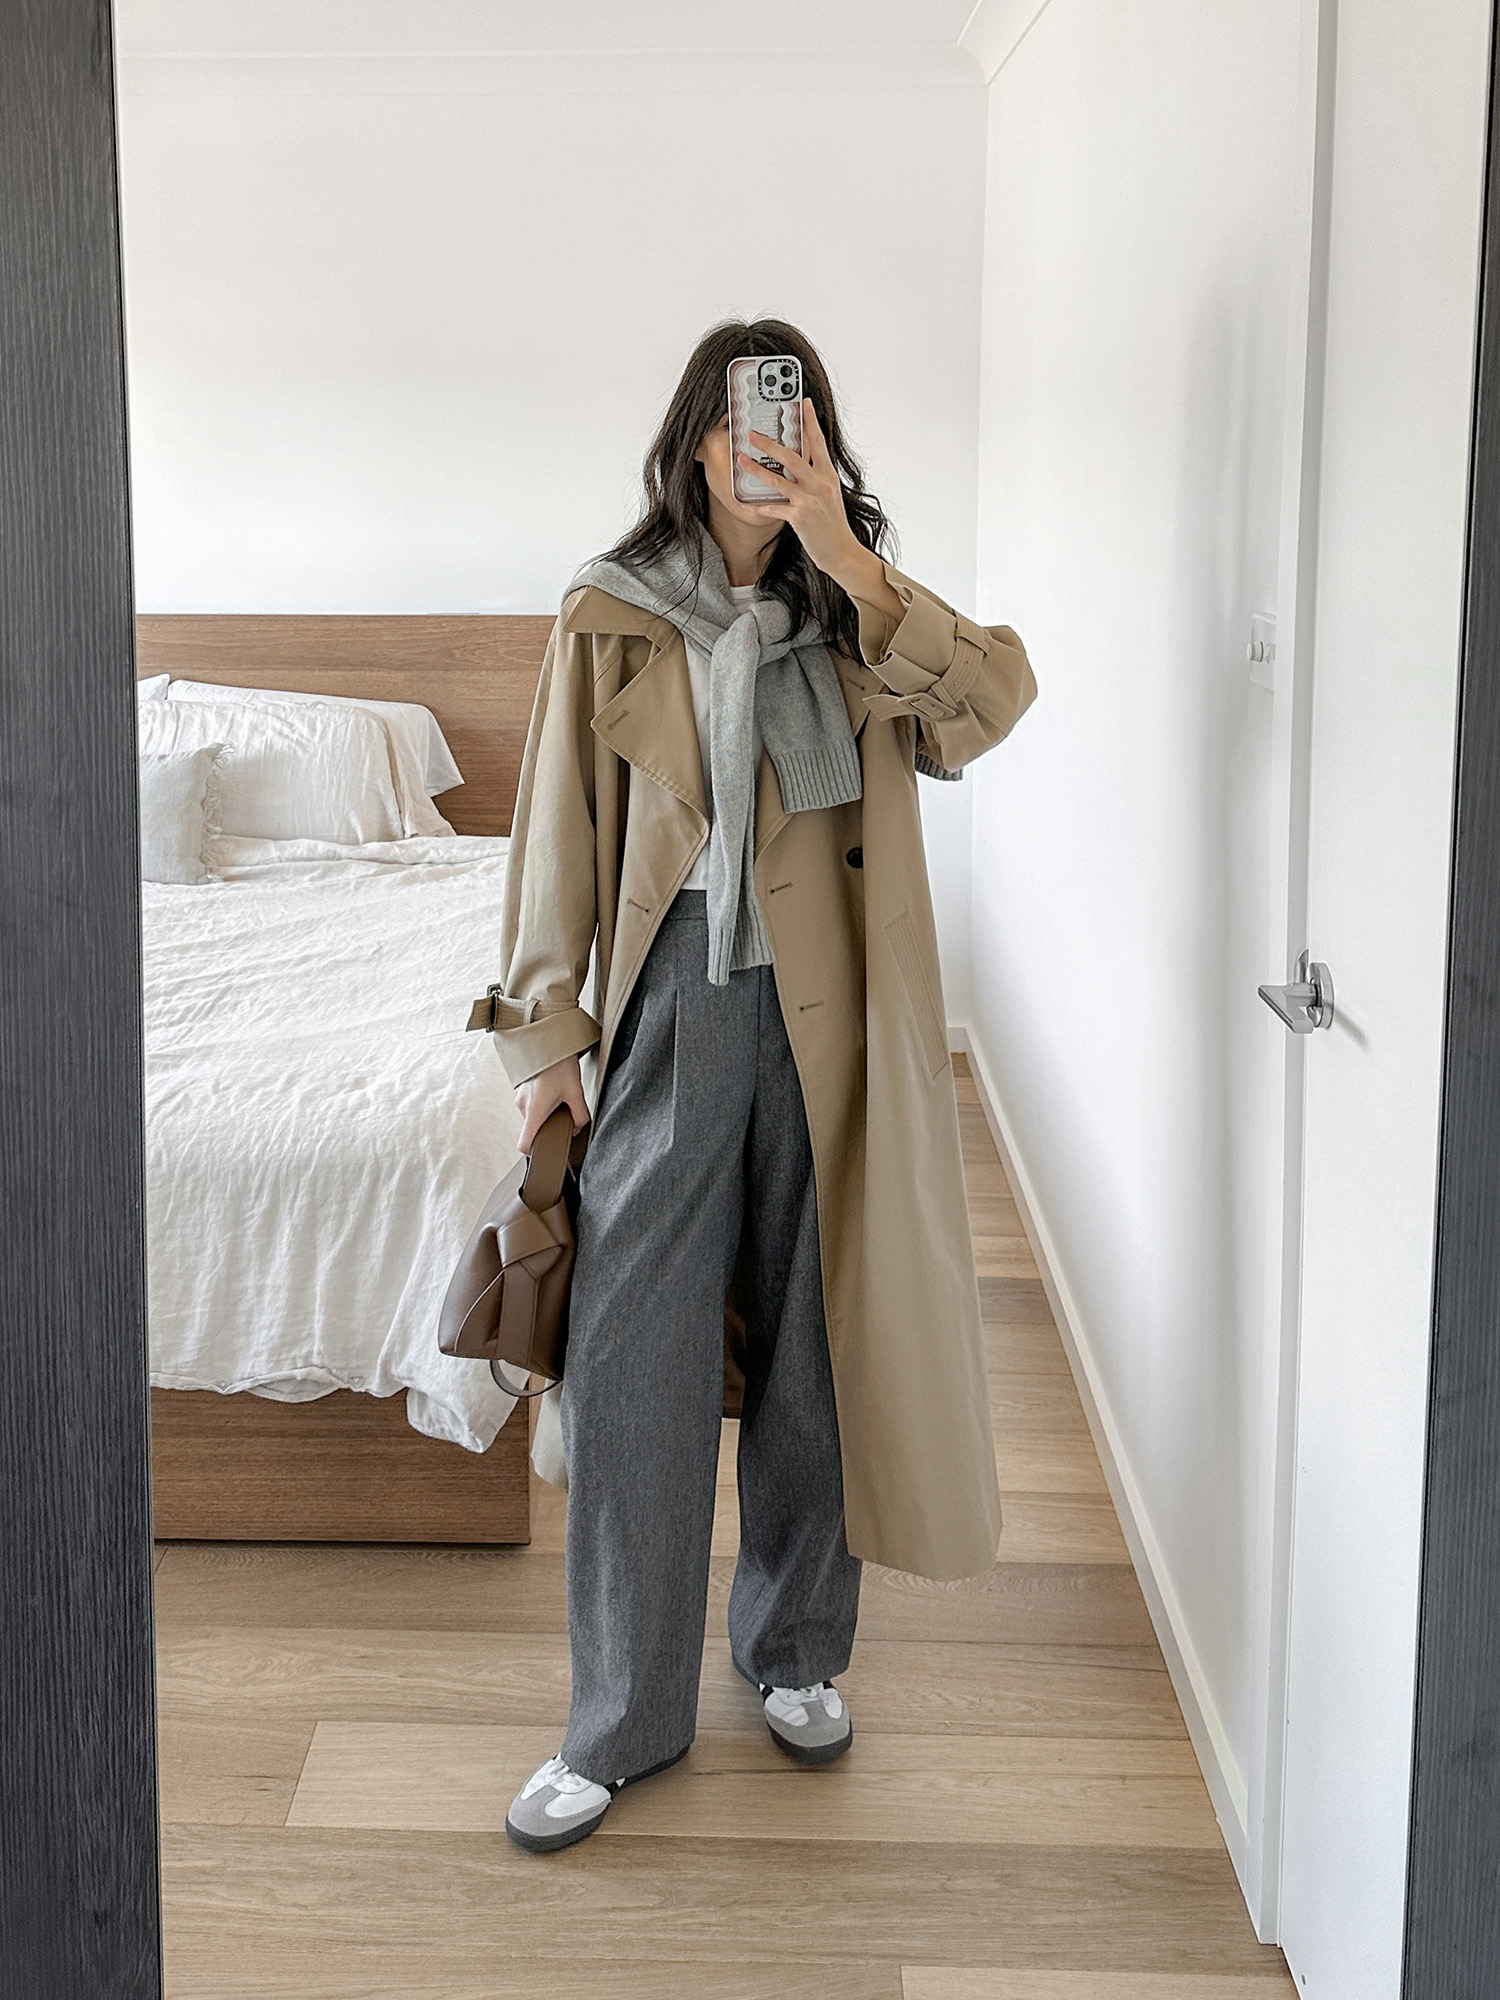 Early winter outfit ideas wearing Parisian chic trench coat with grey trousers and Adidas sambas